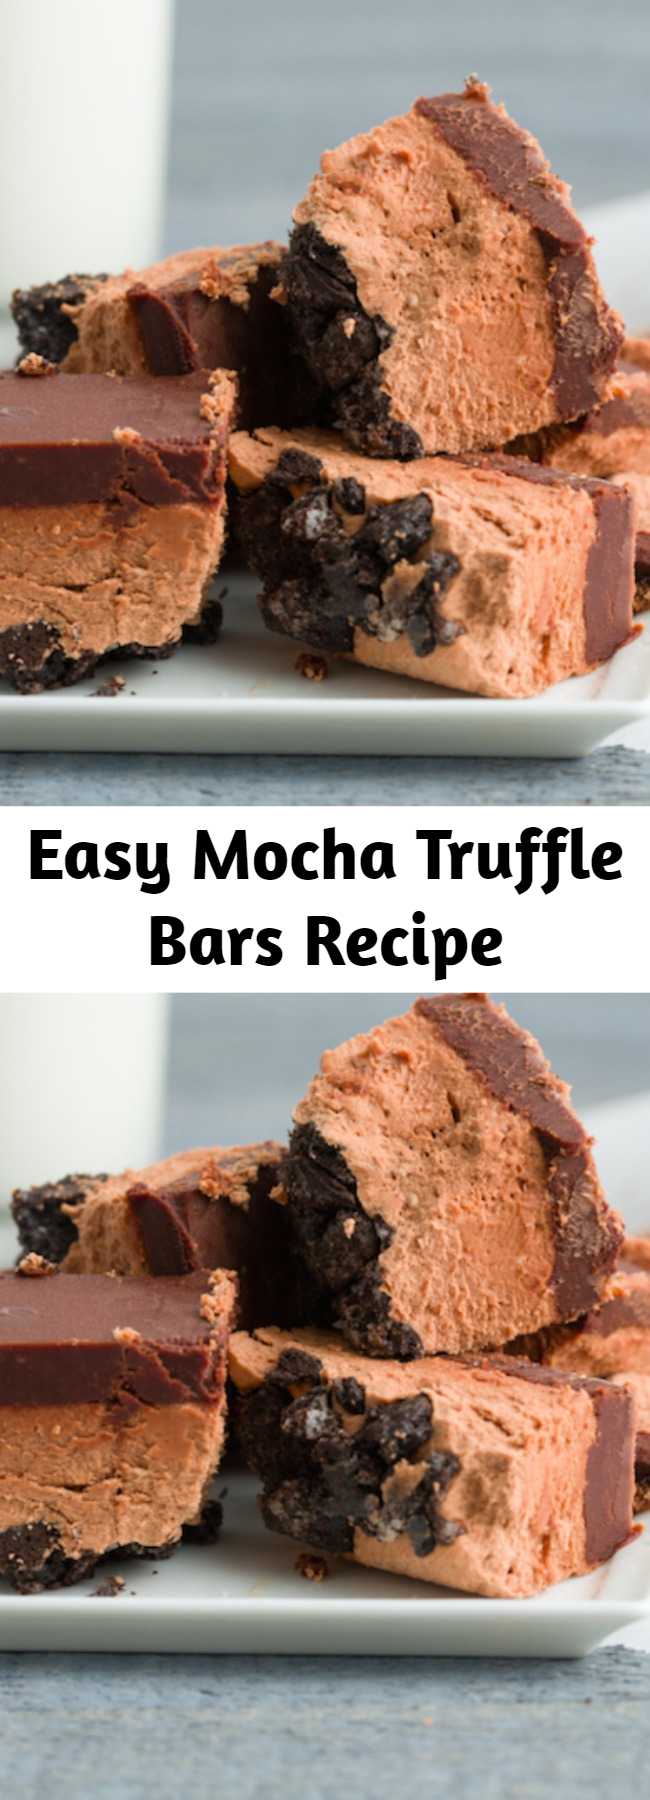 Easy Mocha Truffle Bars Recipe - Get your coffee and chocolate fix in one bite.